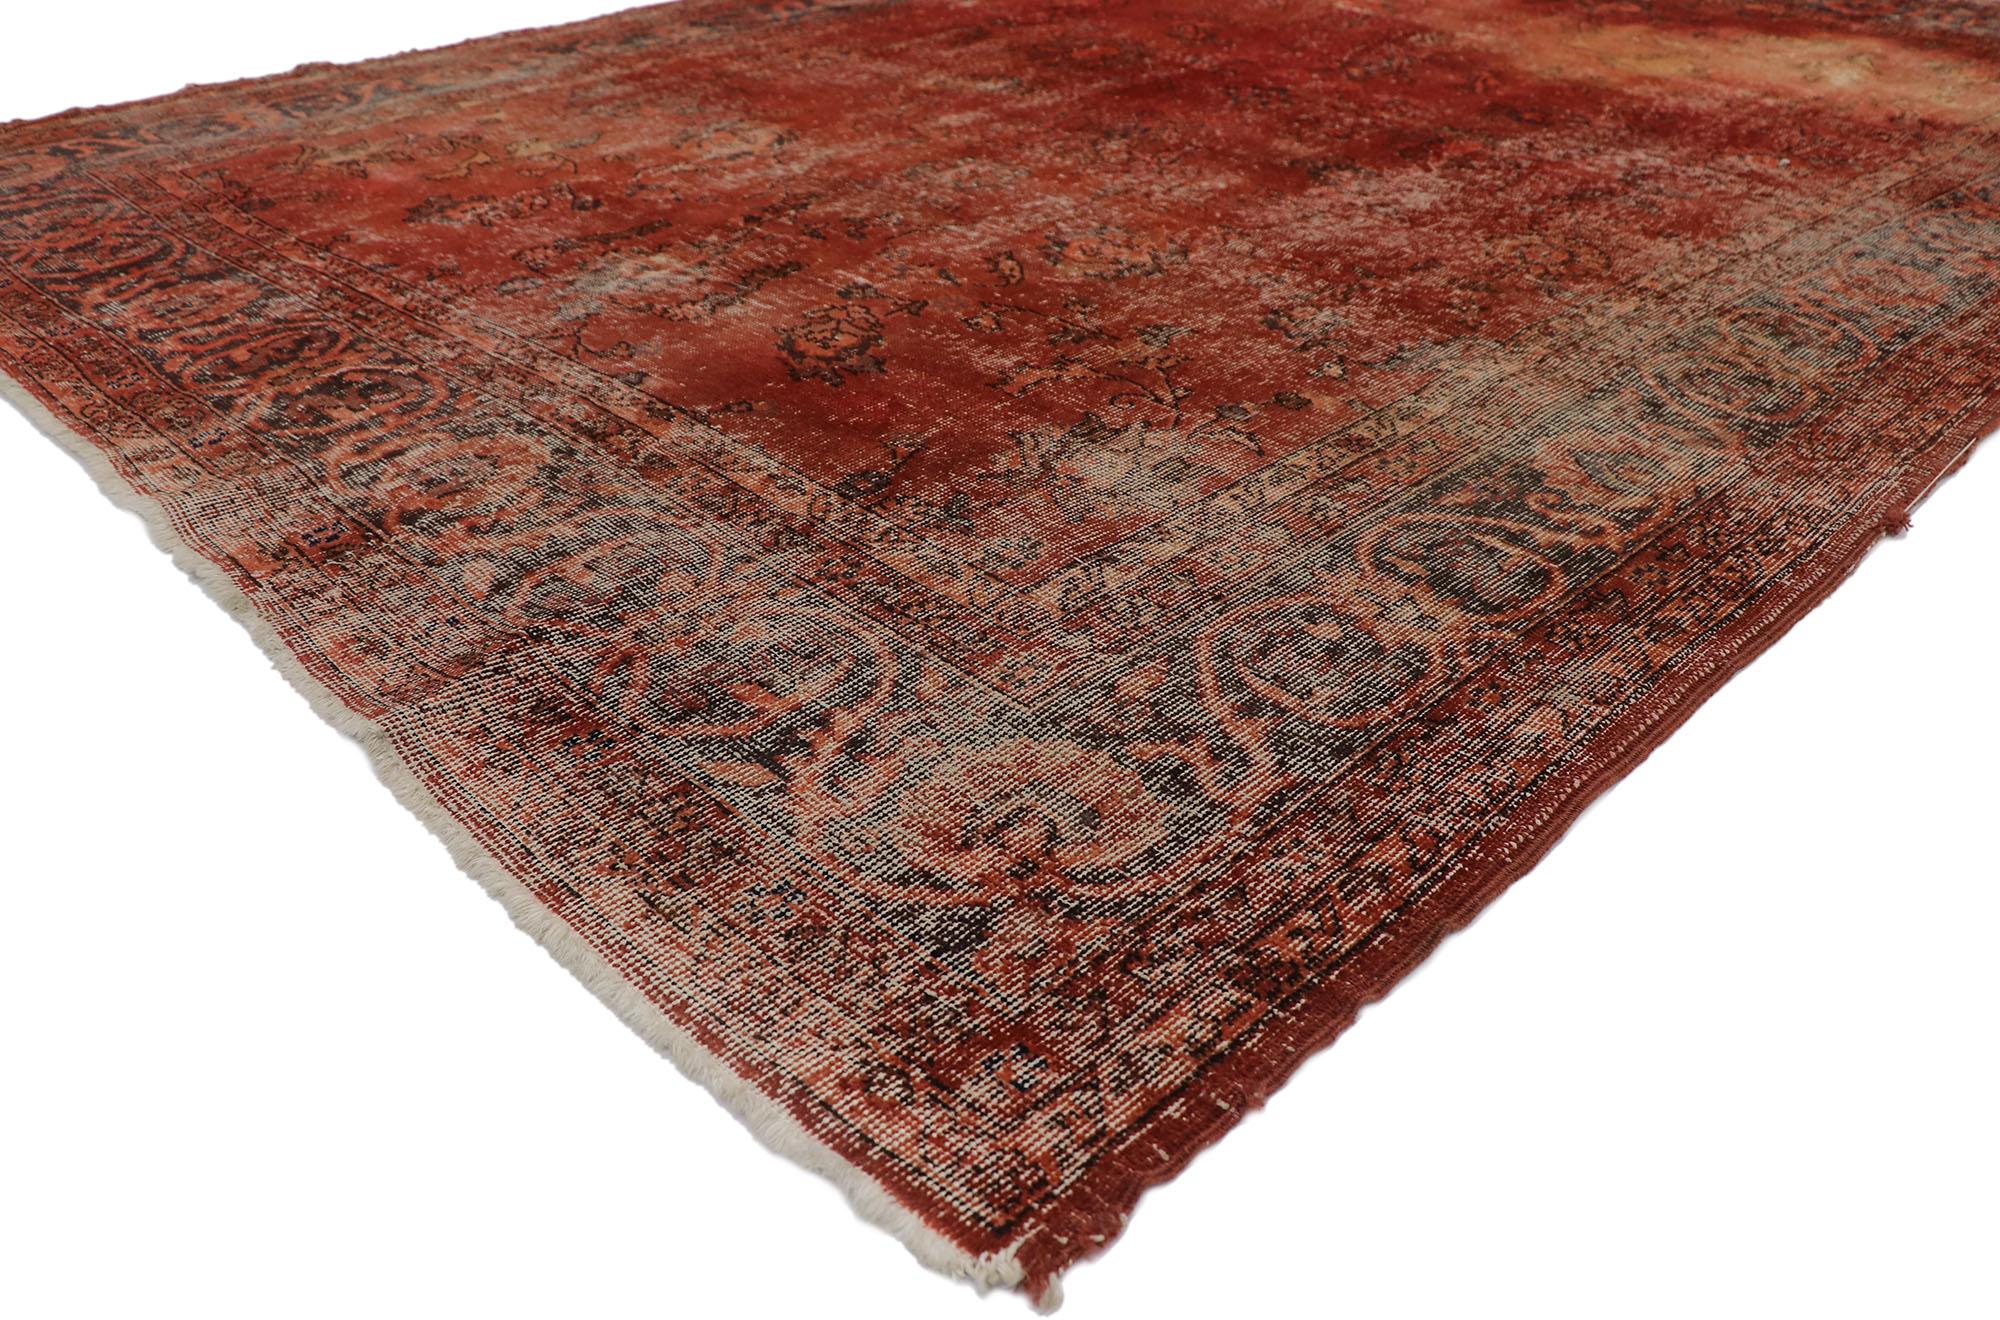 78113 Vintage Turkish Overdyed Rug, 06'11 x 10'00.
Emanating rustic sensibility and relaxed aesthetic, this vintage Turkish overdyed rug is a captivating vision of woven rugged beauty. Overdyed and faded throughout with a shorn pile, the distressed